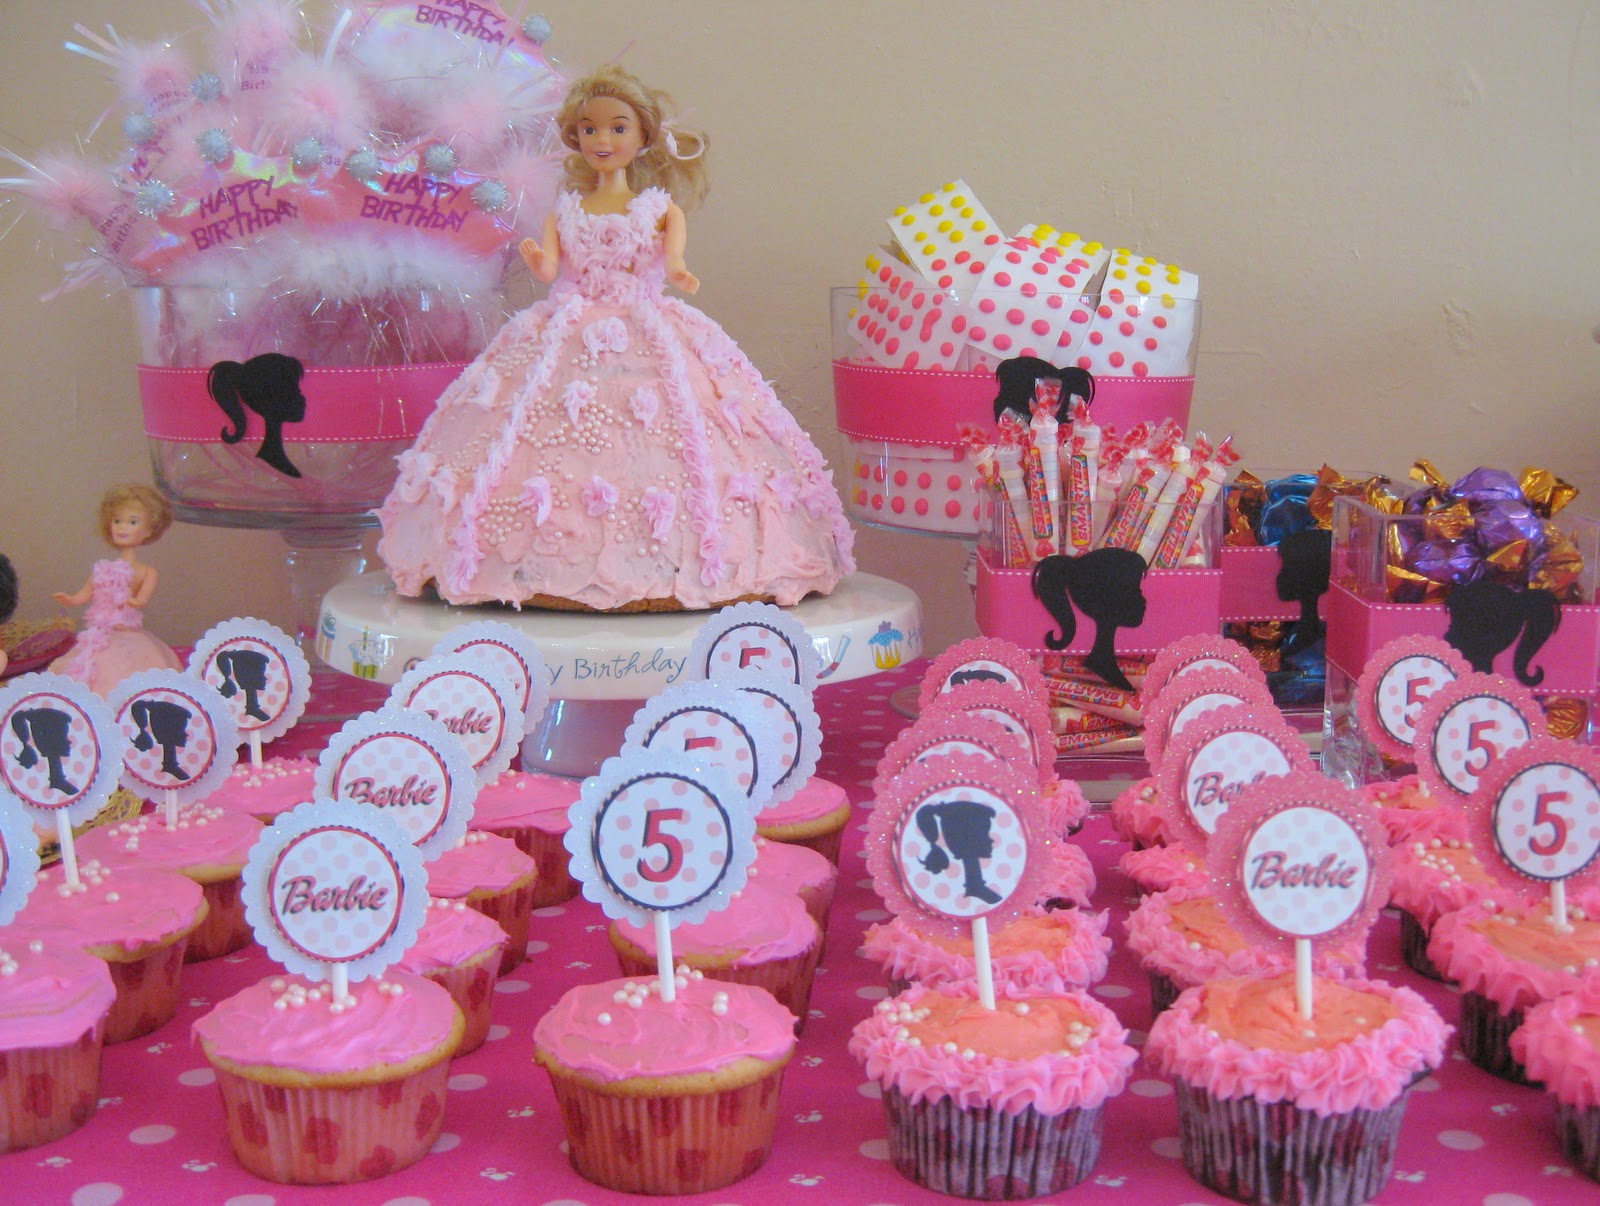 swanky-chic-fete-pink-barbie-party-a-5th-birthday-party